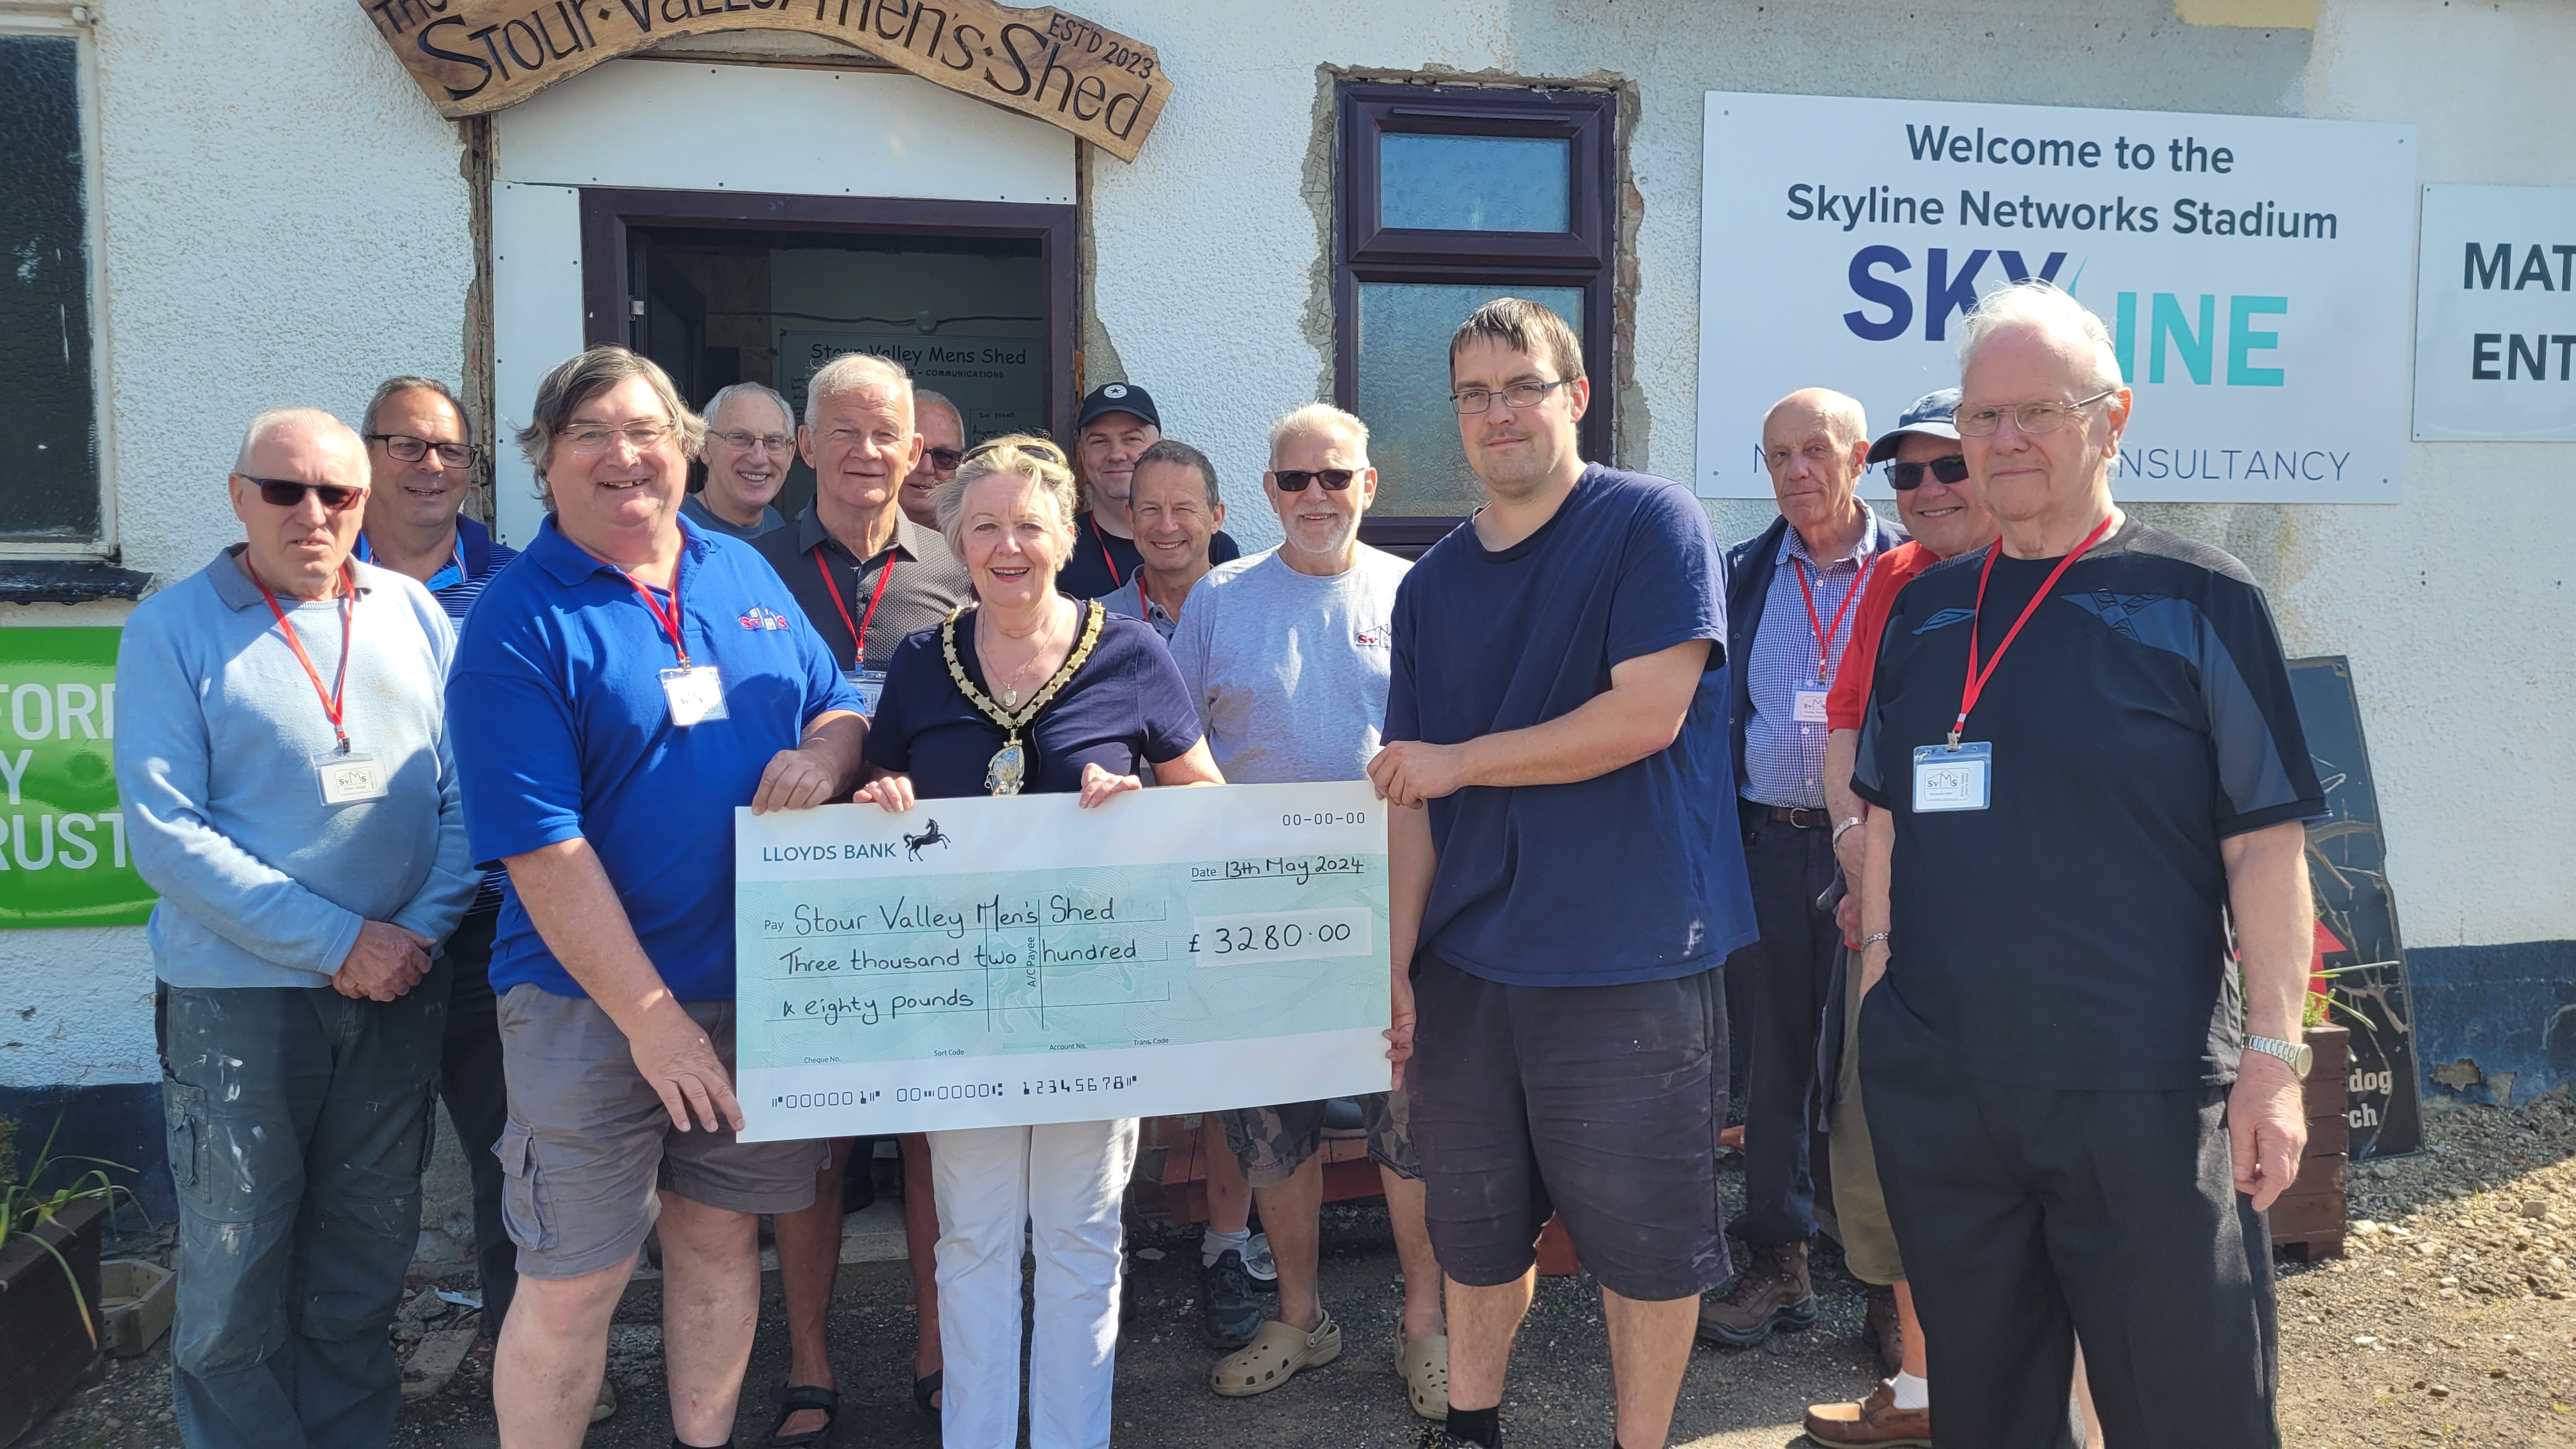 Babergh Council Chair, Cllr Malvisi presents the cheque to the Stour Valley Men’s Shed Chairman Adrian Beckham